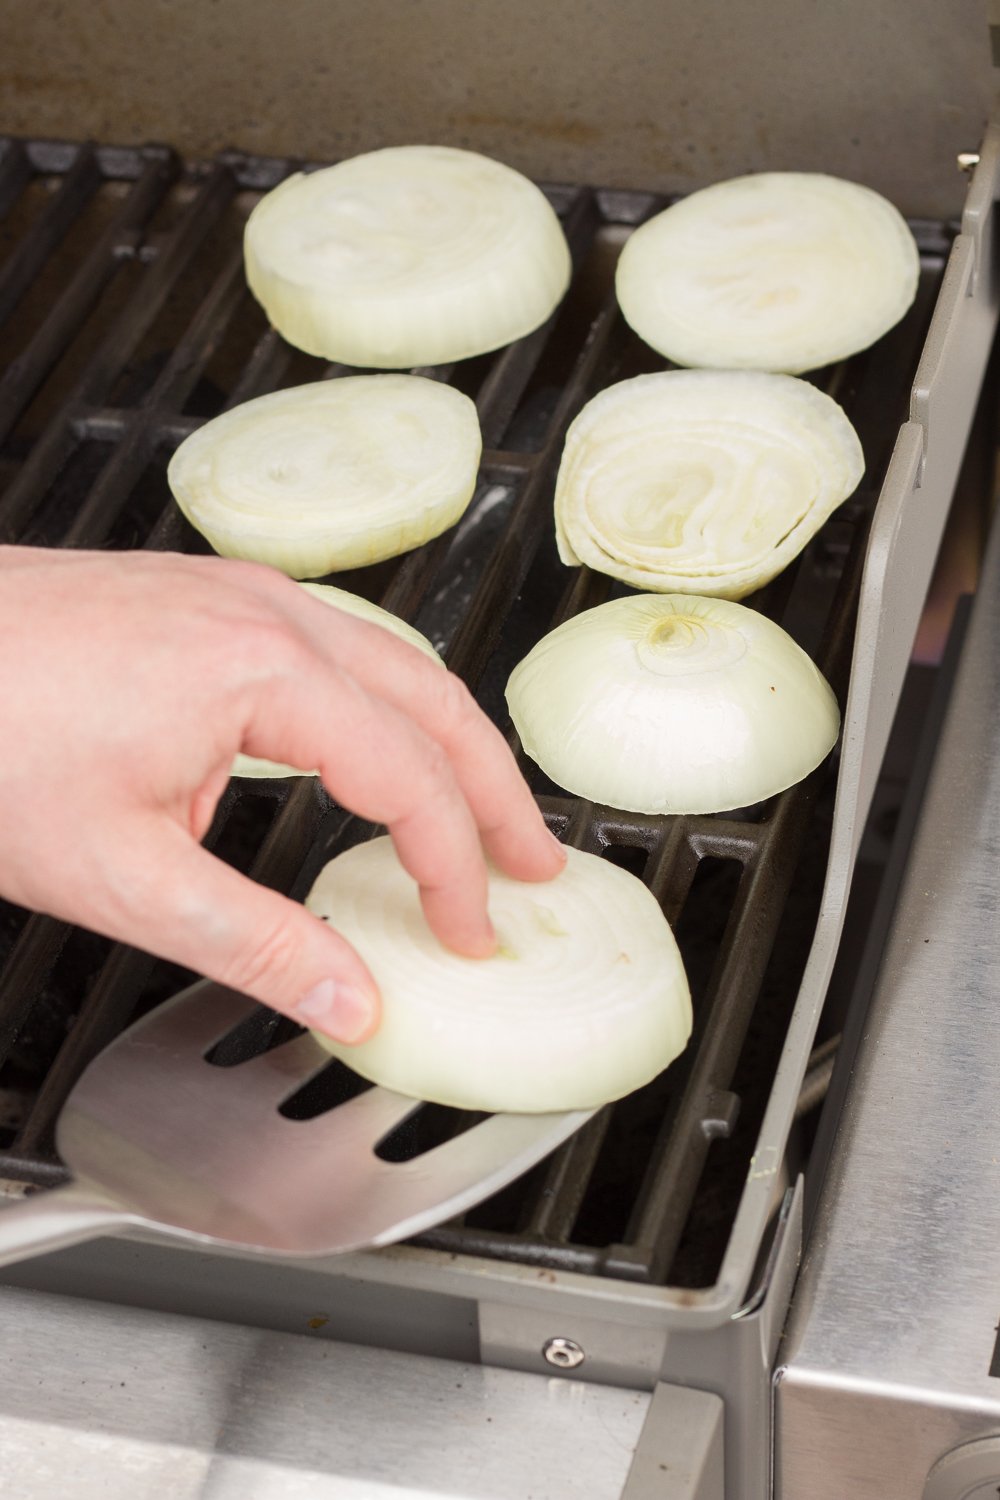 A hand placing an onion ring on a grill. Six other slices of onion are on the grill beside it.